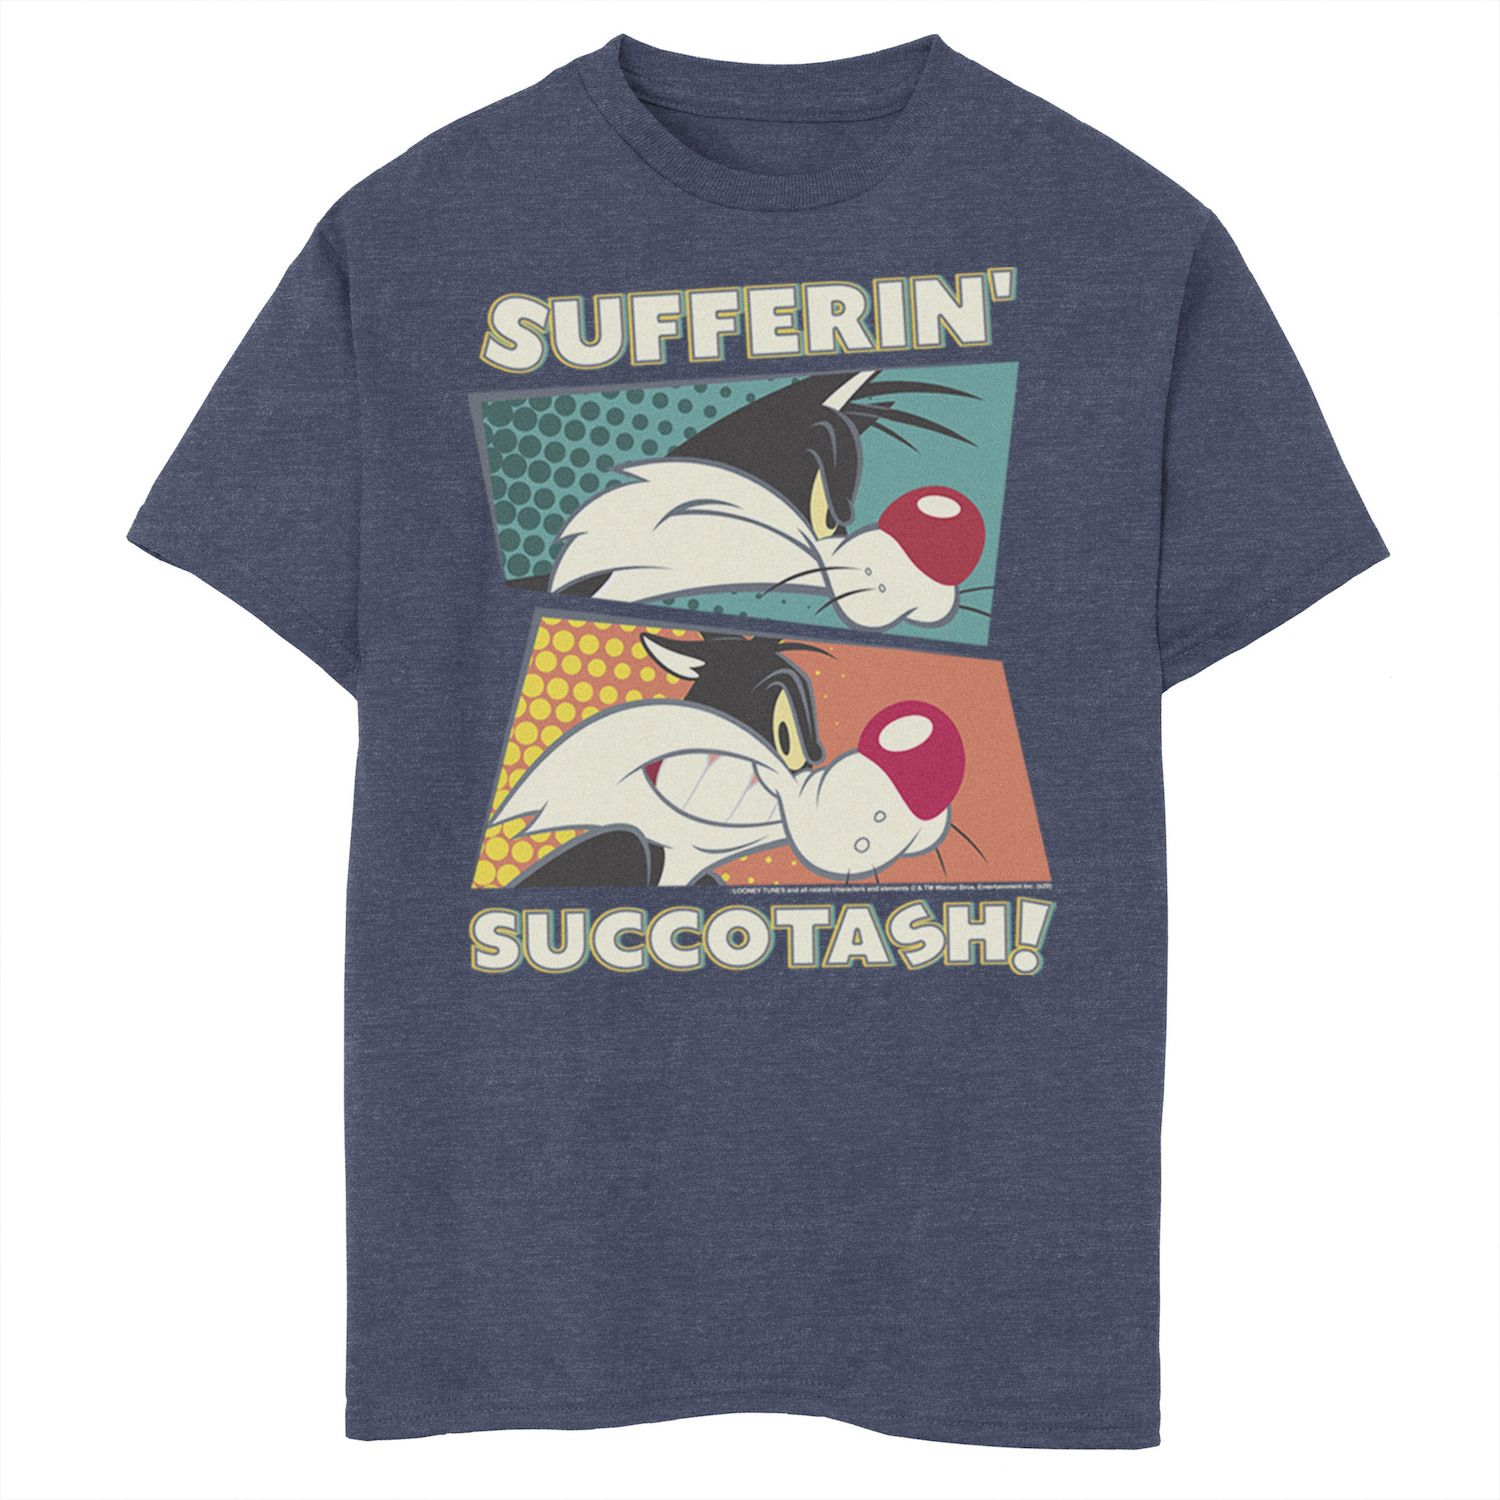 Image for Licensed Character Boys 8-20 Looney Tunes Sylvester Sufferin' Succotash Graphic Tee at Kohl's.